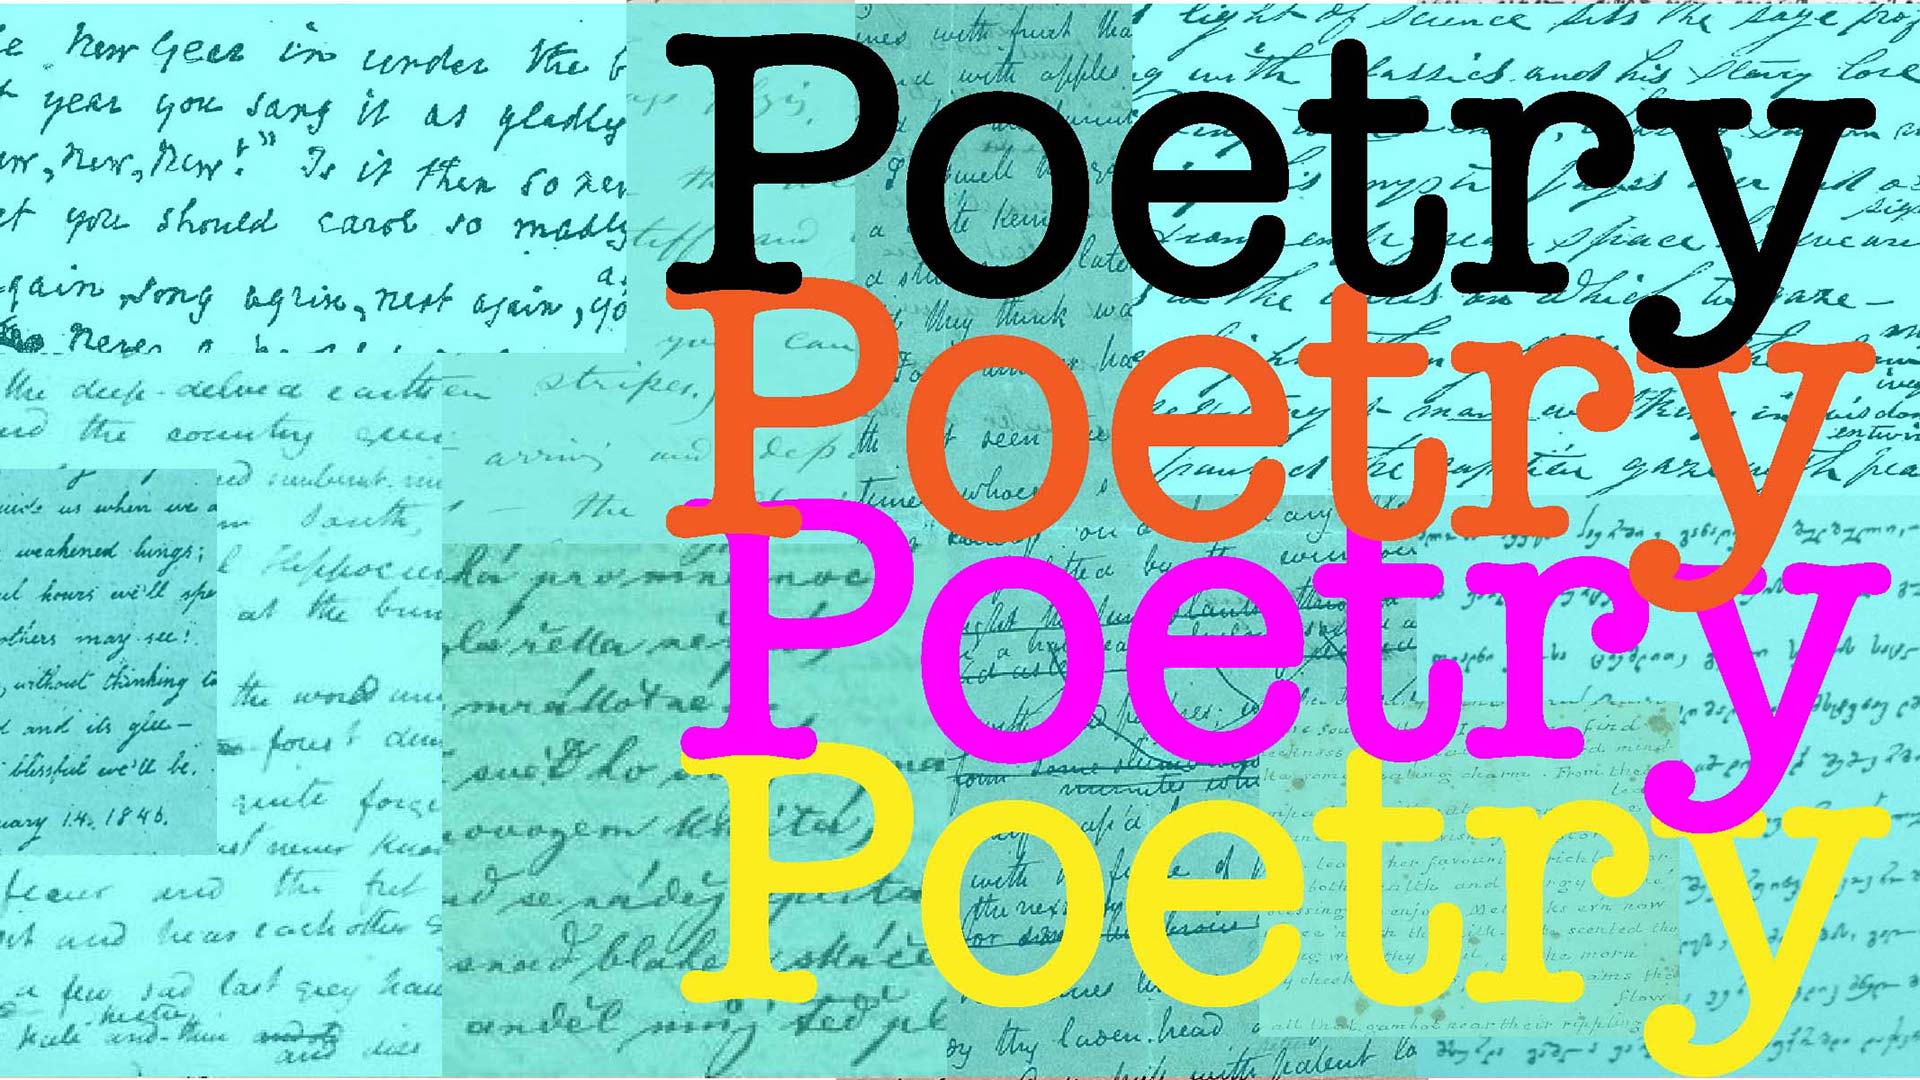 Poetry written multiple times in various colors upon a teal background of handwritten poetry.